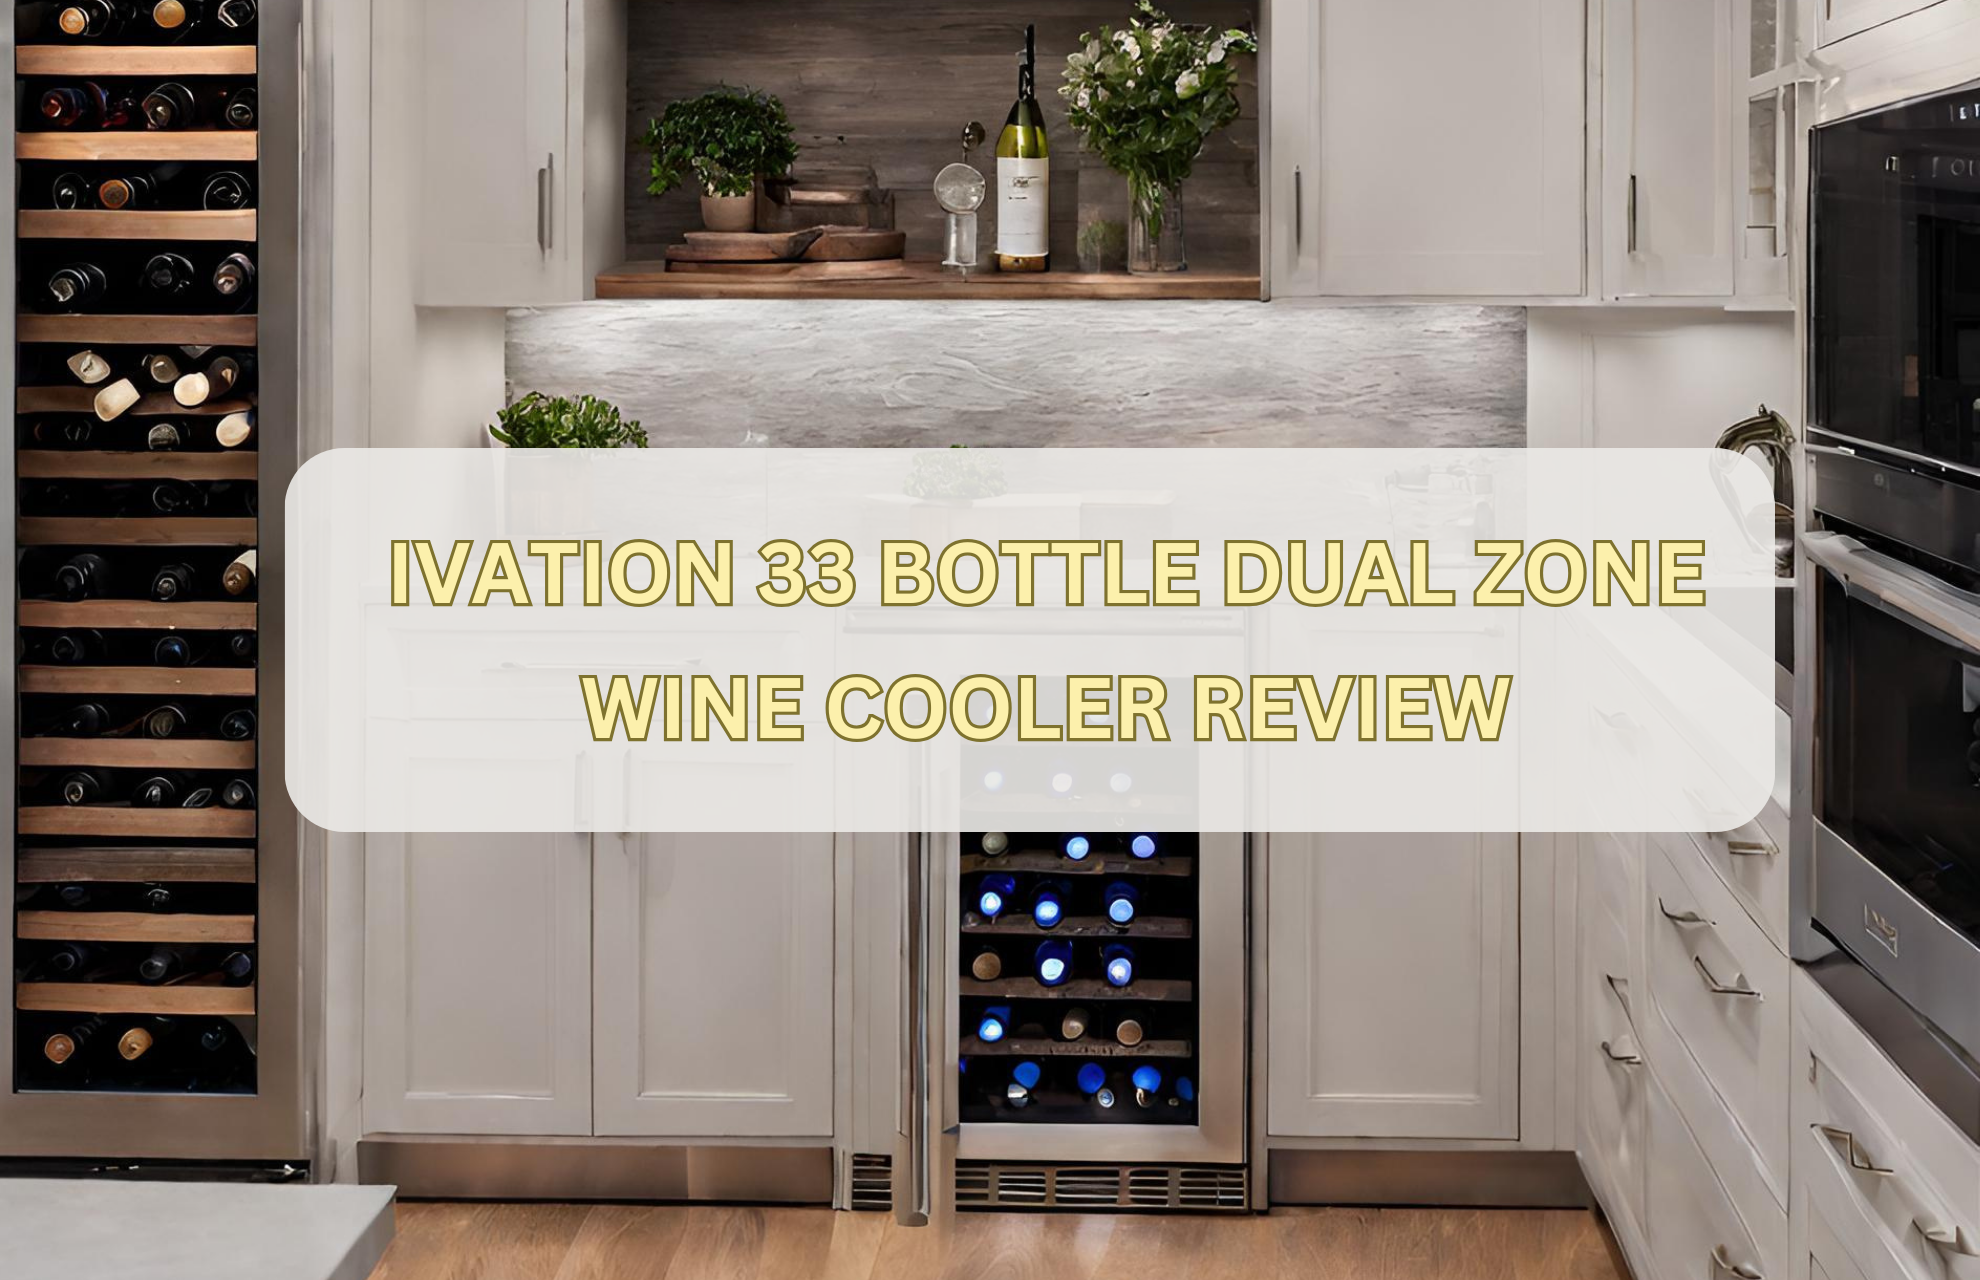 IVATION 33 BOTTLE DUAL ZONE WINE COOLER REVIEW